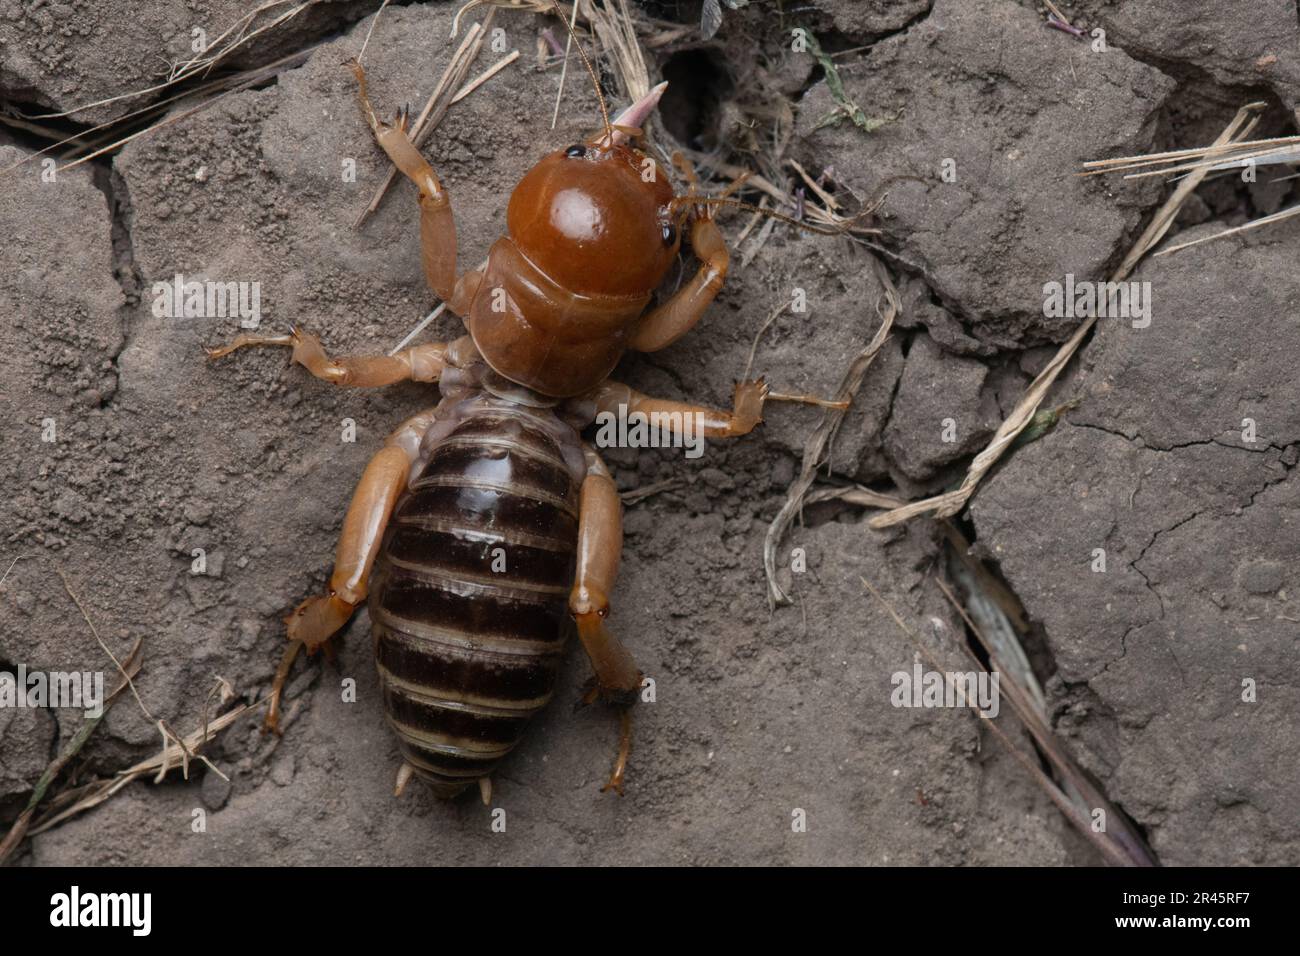 A jerusalem cricket (Ammopelmatus) an nocturnal insect from Santa Cruz island in the Channel islands National Park in California. Stock Photo